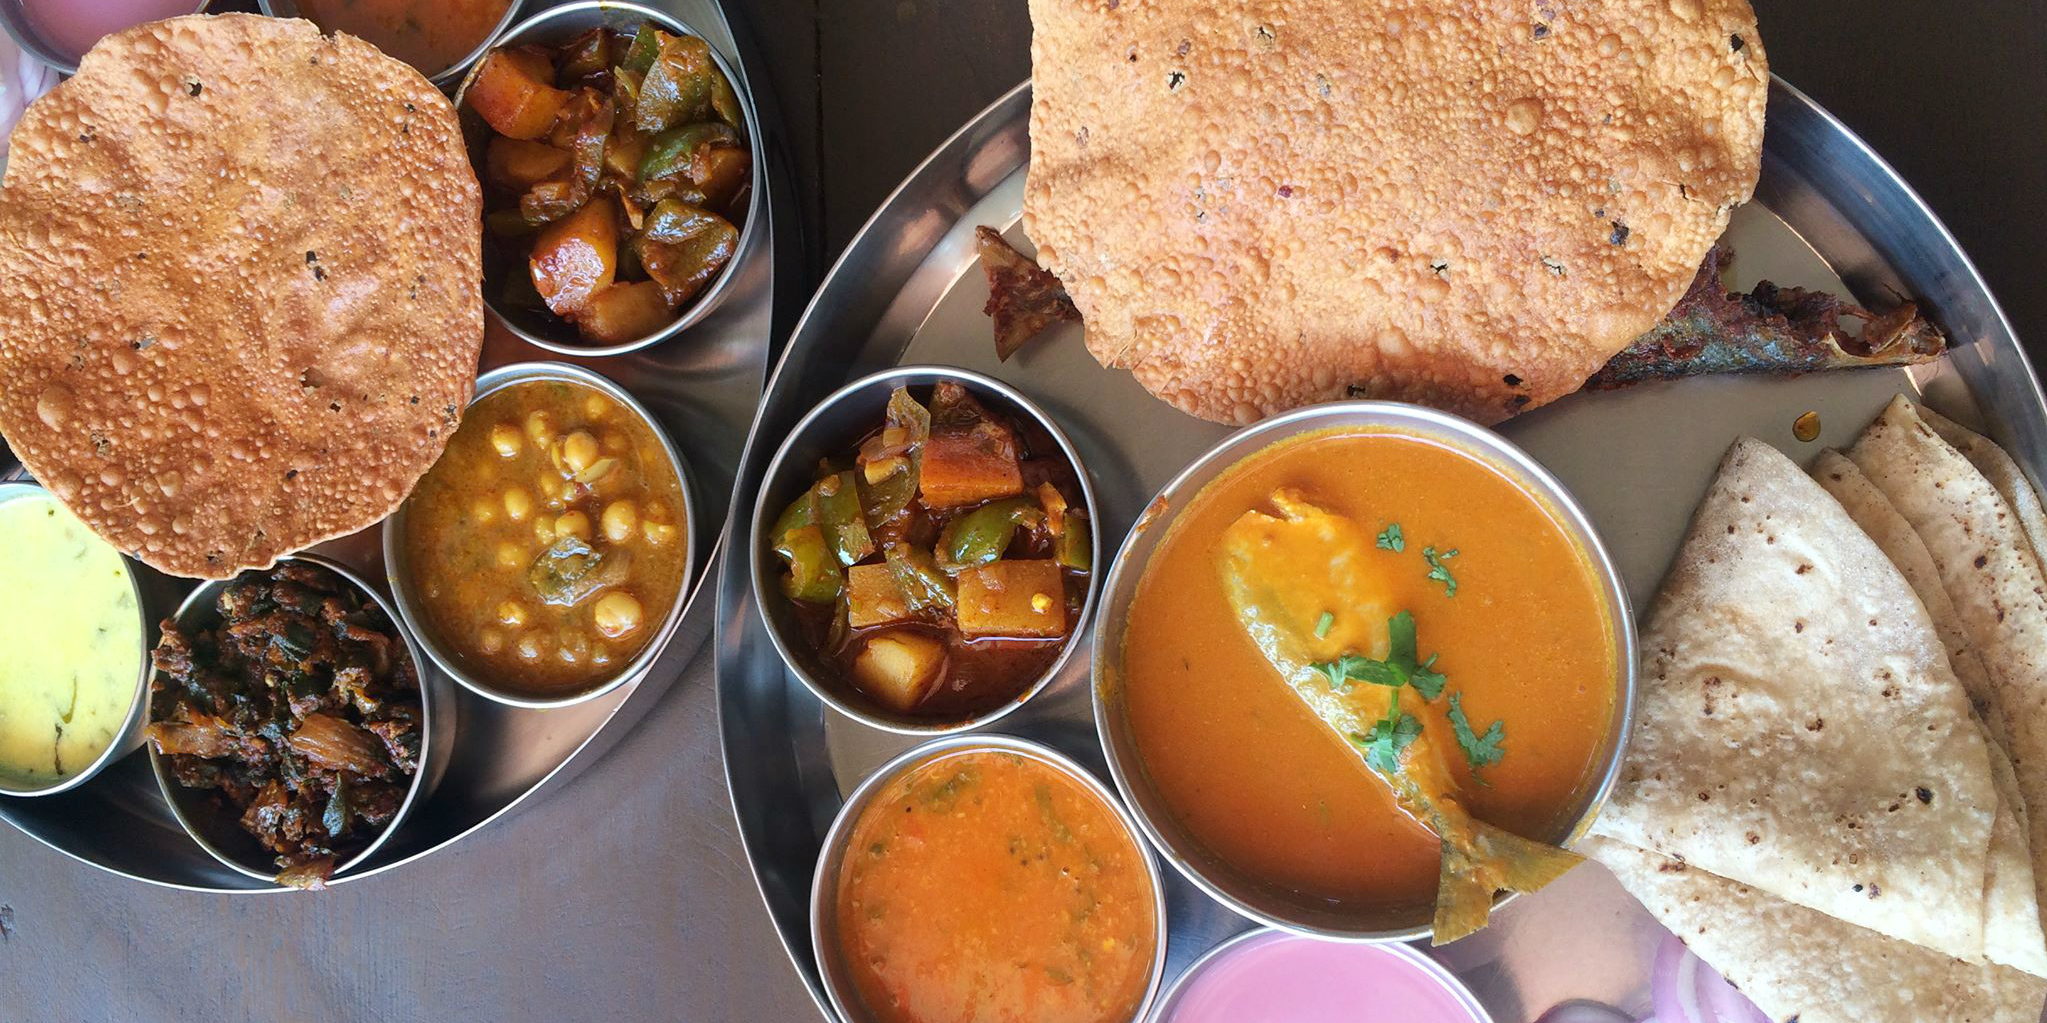 Travel to India and you'll be able to sample local cuisine.